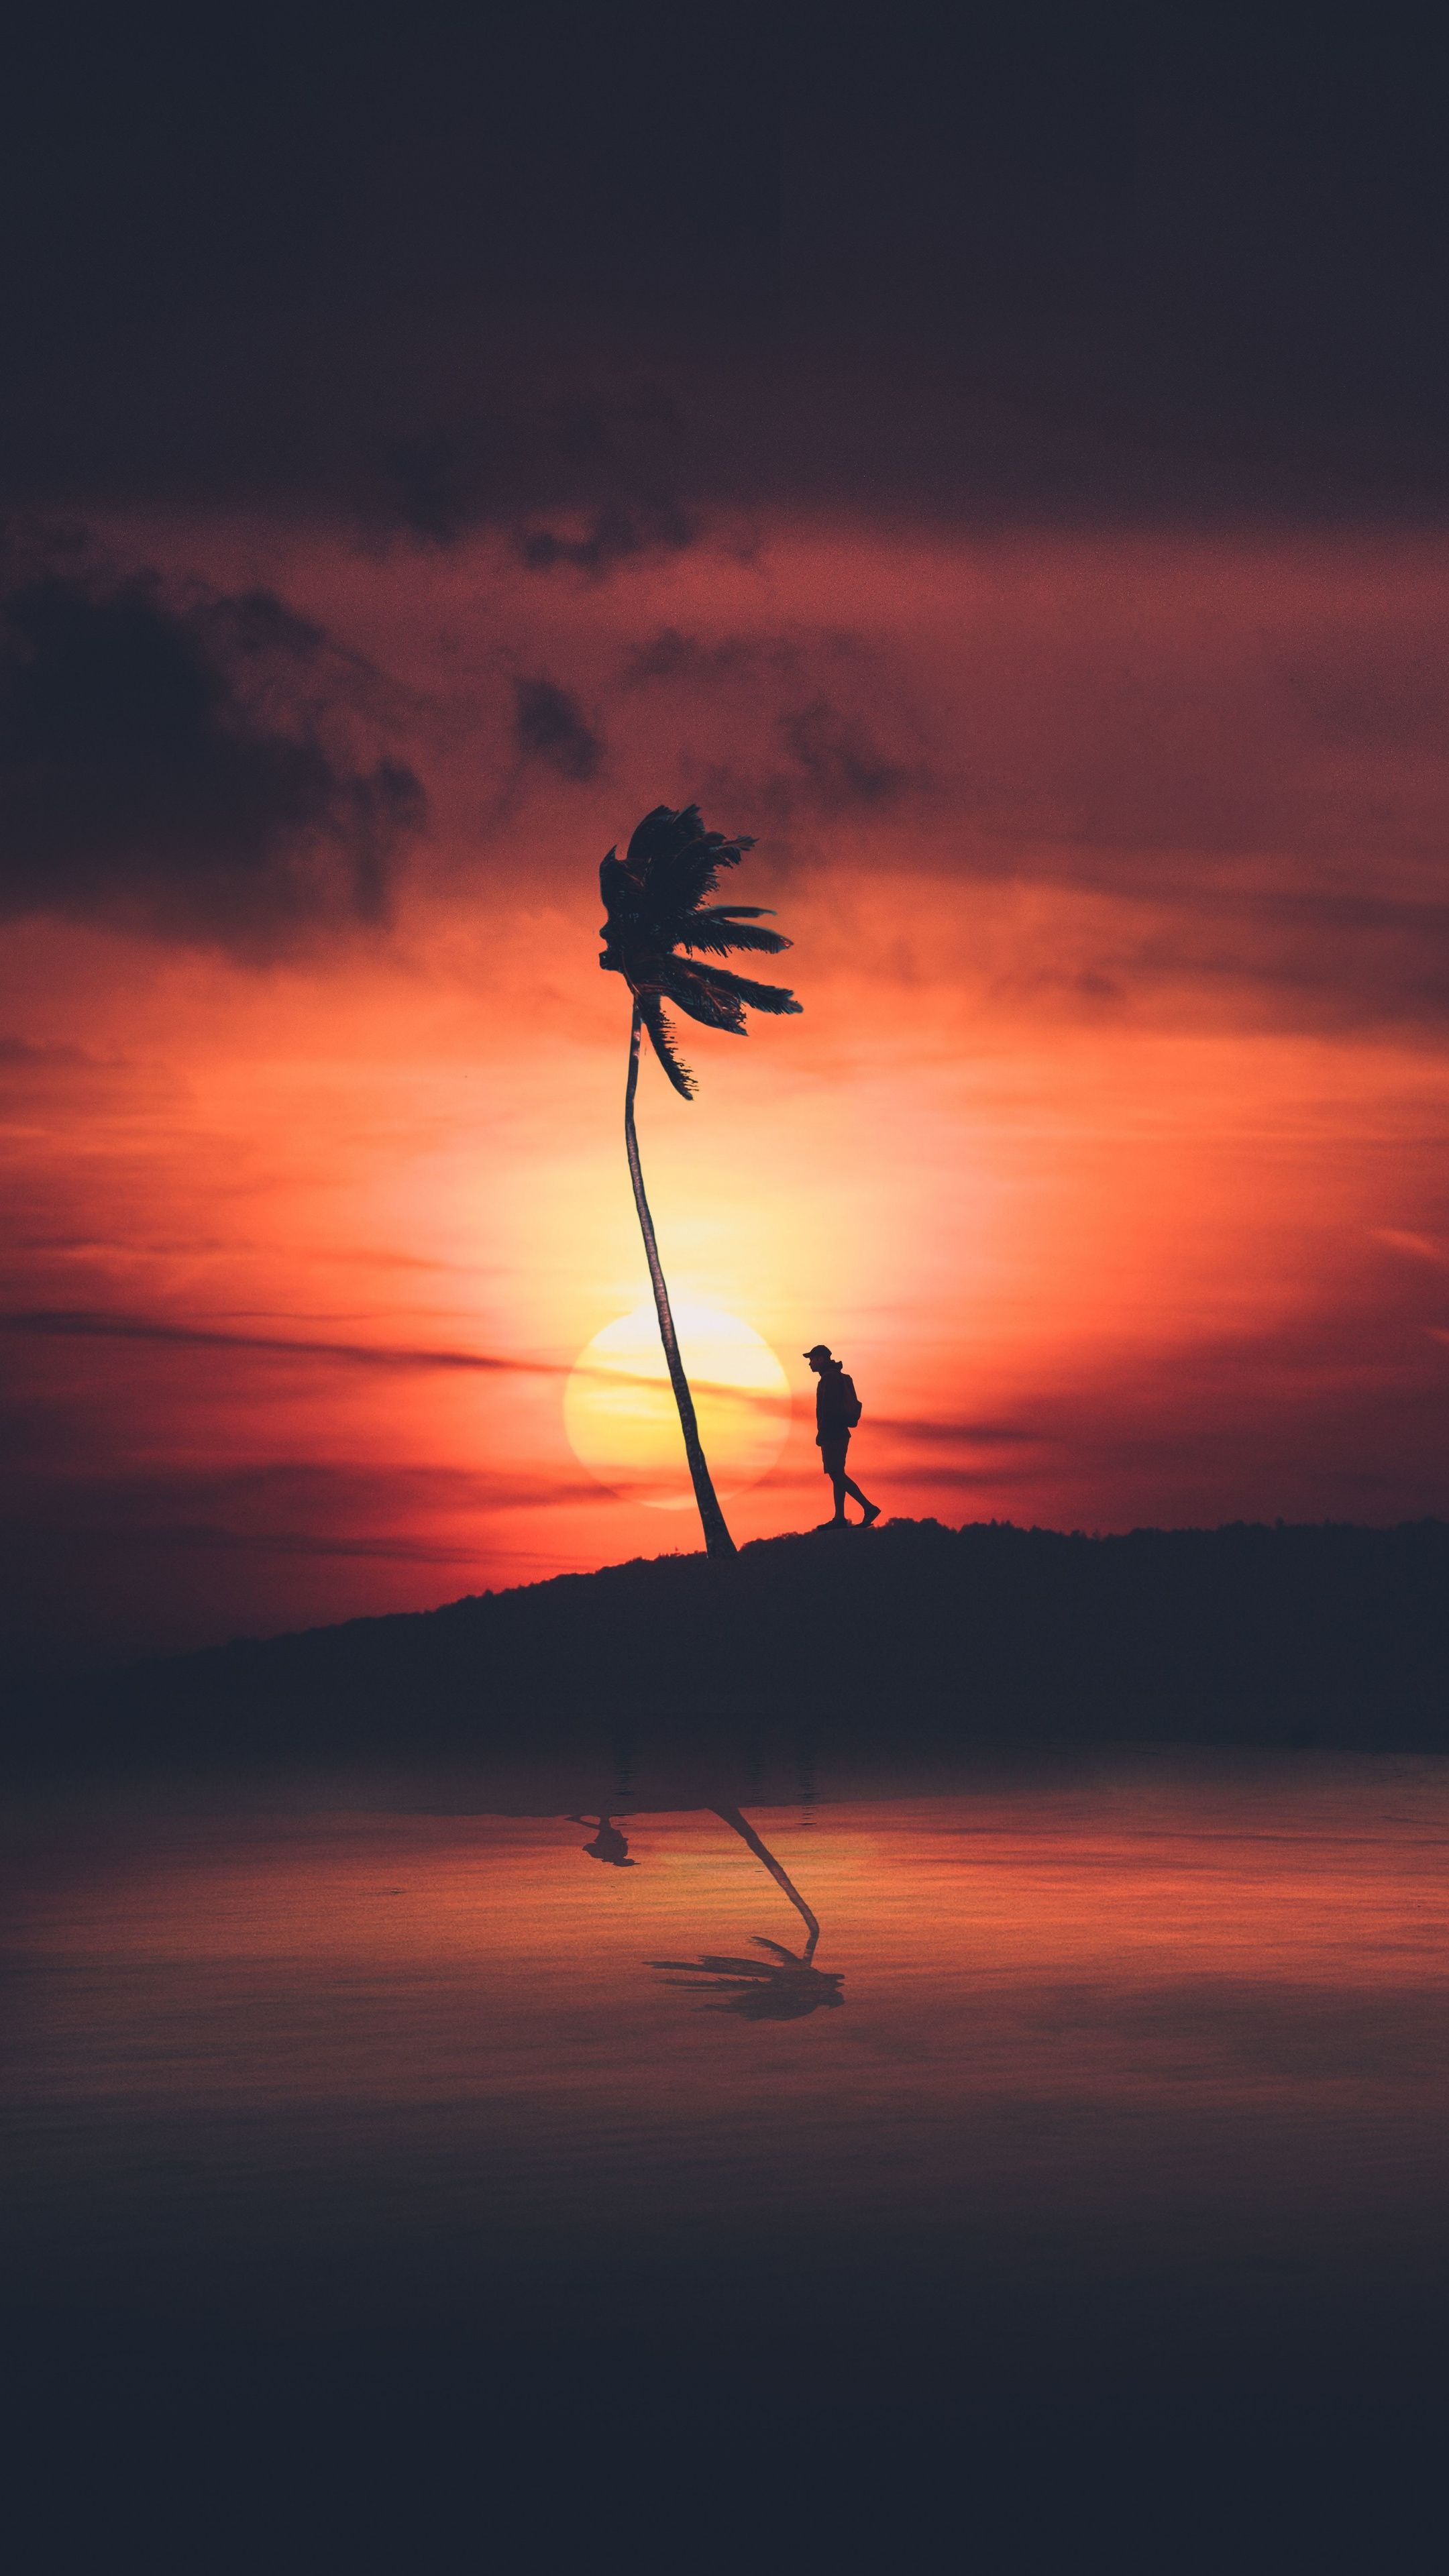 Man And Palm Tree Silhouette Sunset Wallpaper